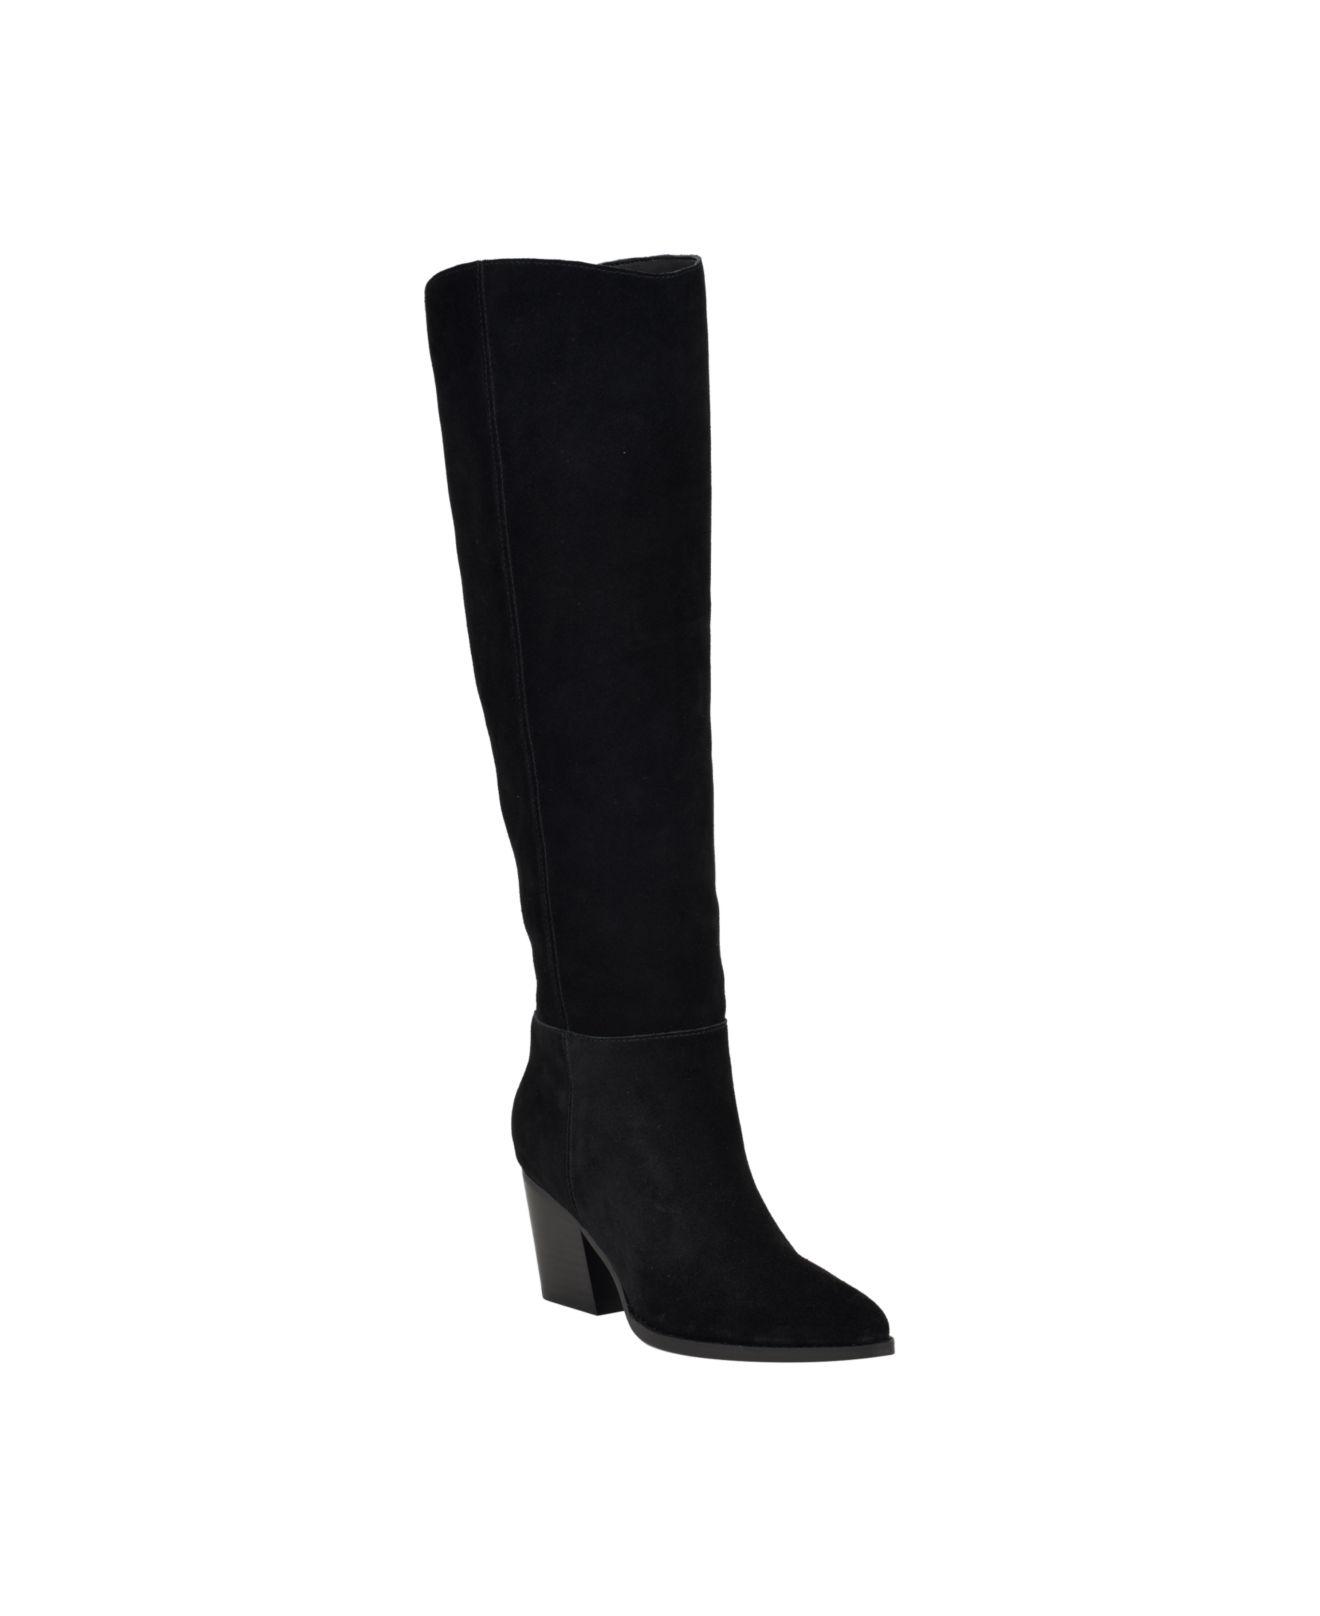 Guess Dolita Block Heel Over The Knee Dress Boots in Black | Lyst